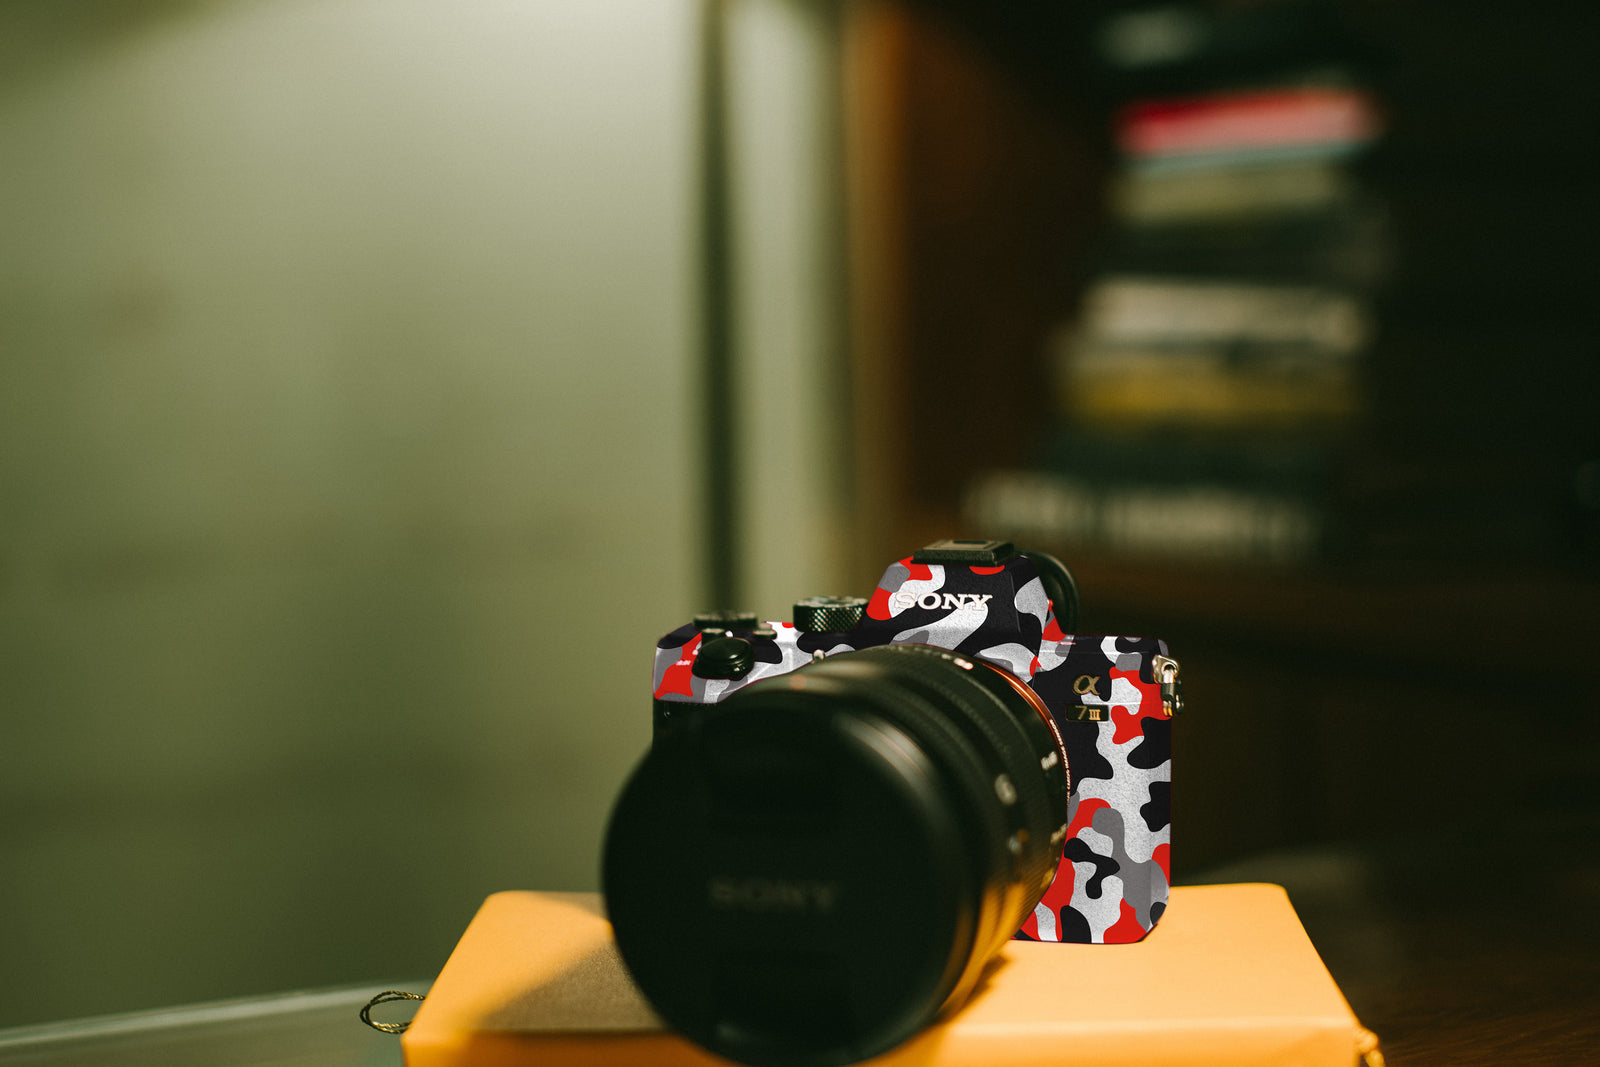 Ease-up Your Clicks by Using DSLR Camera Skins